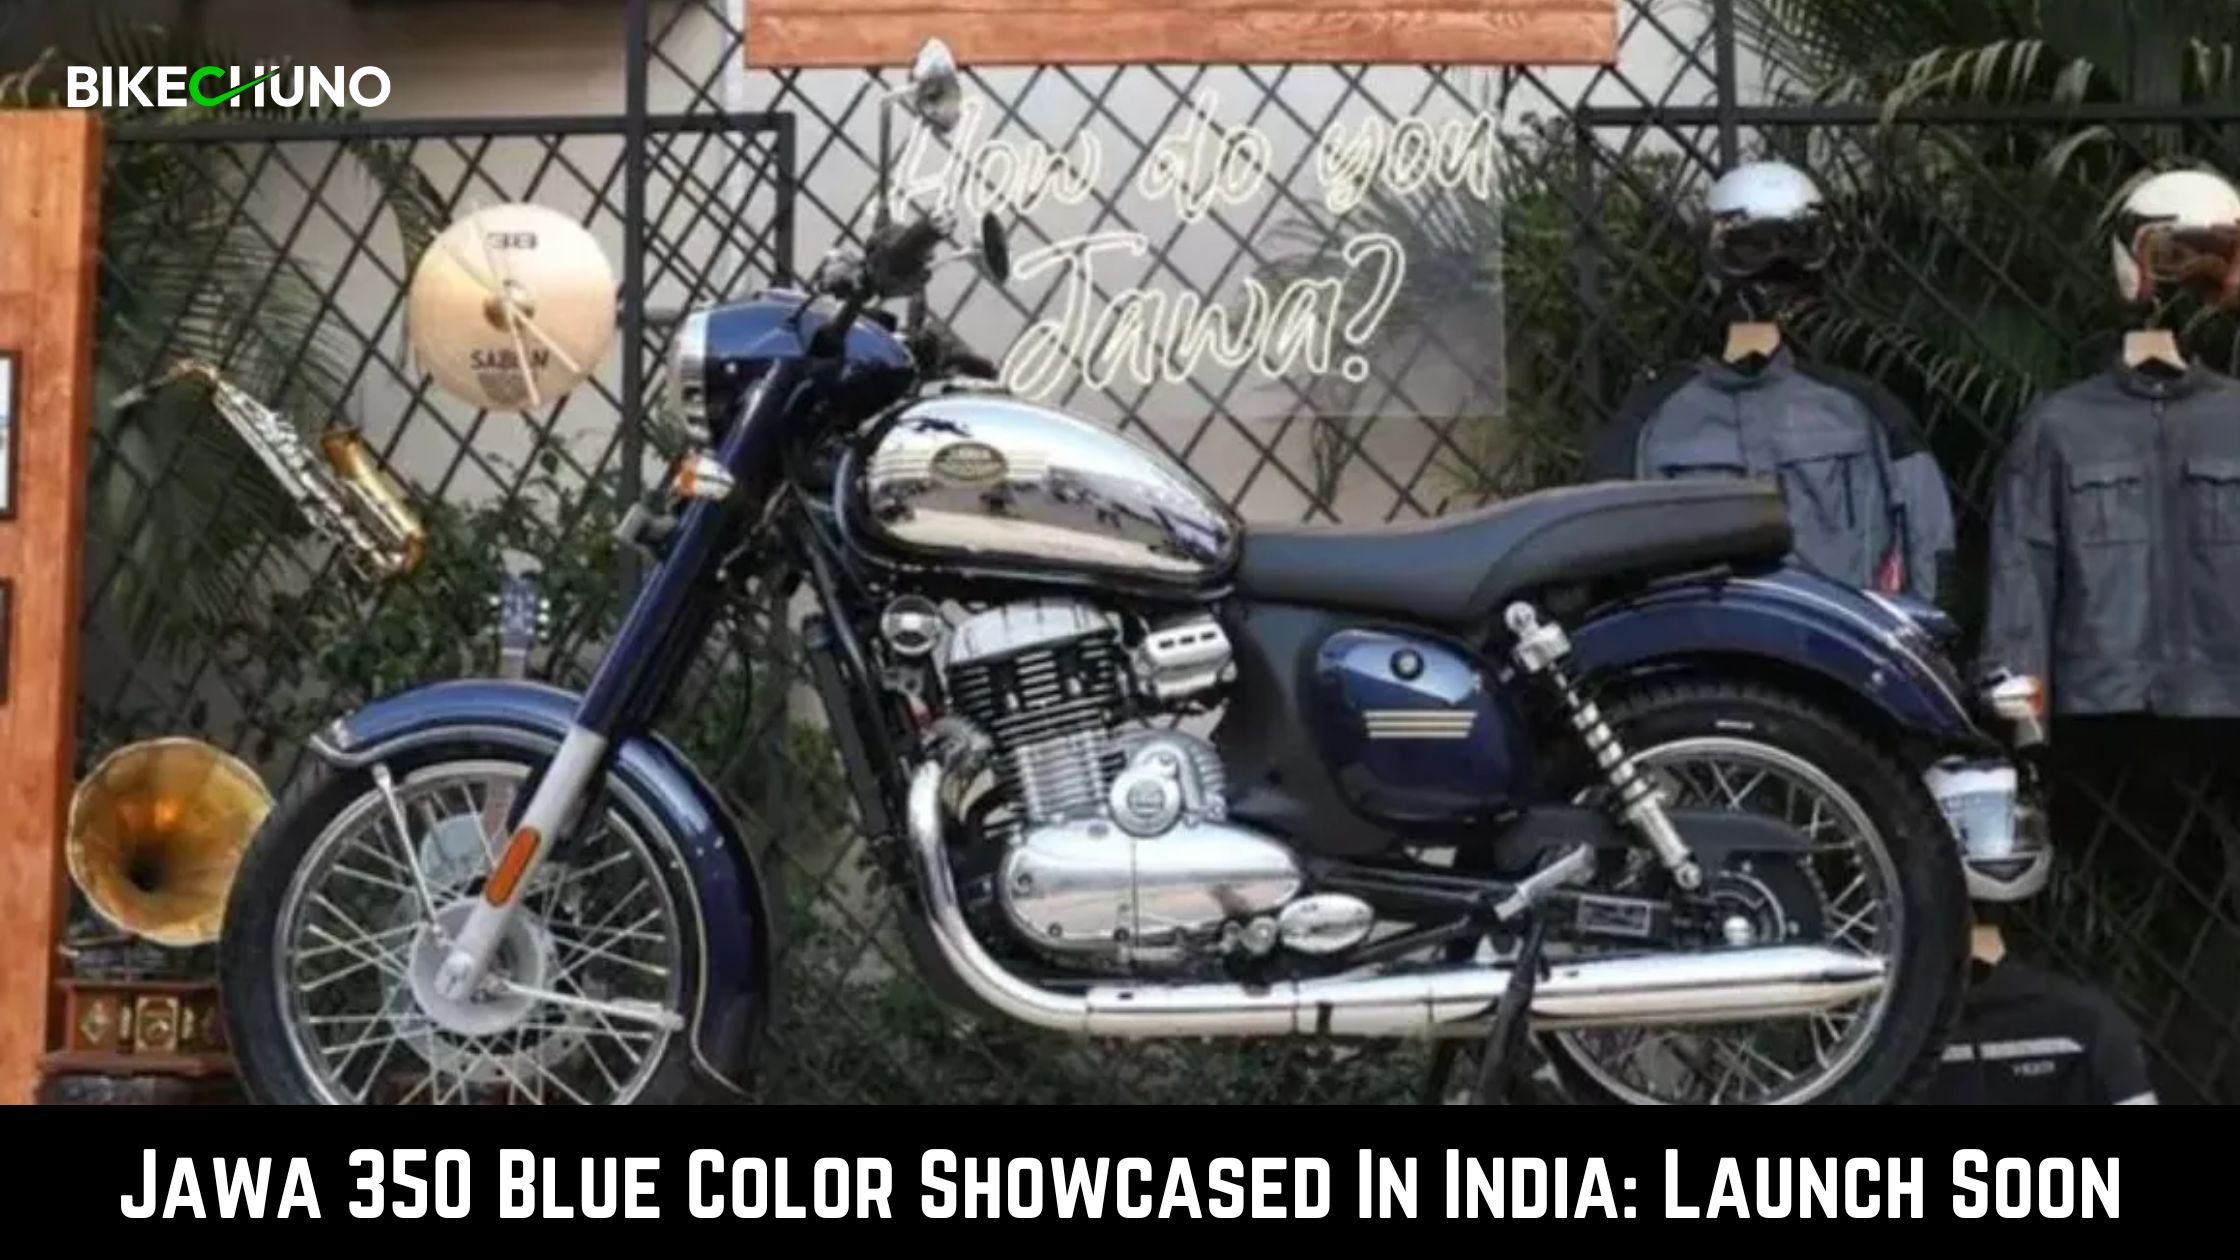 Jawa 350 Blue Color Showcased In India